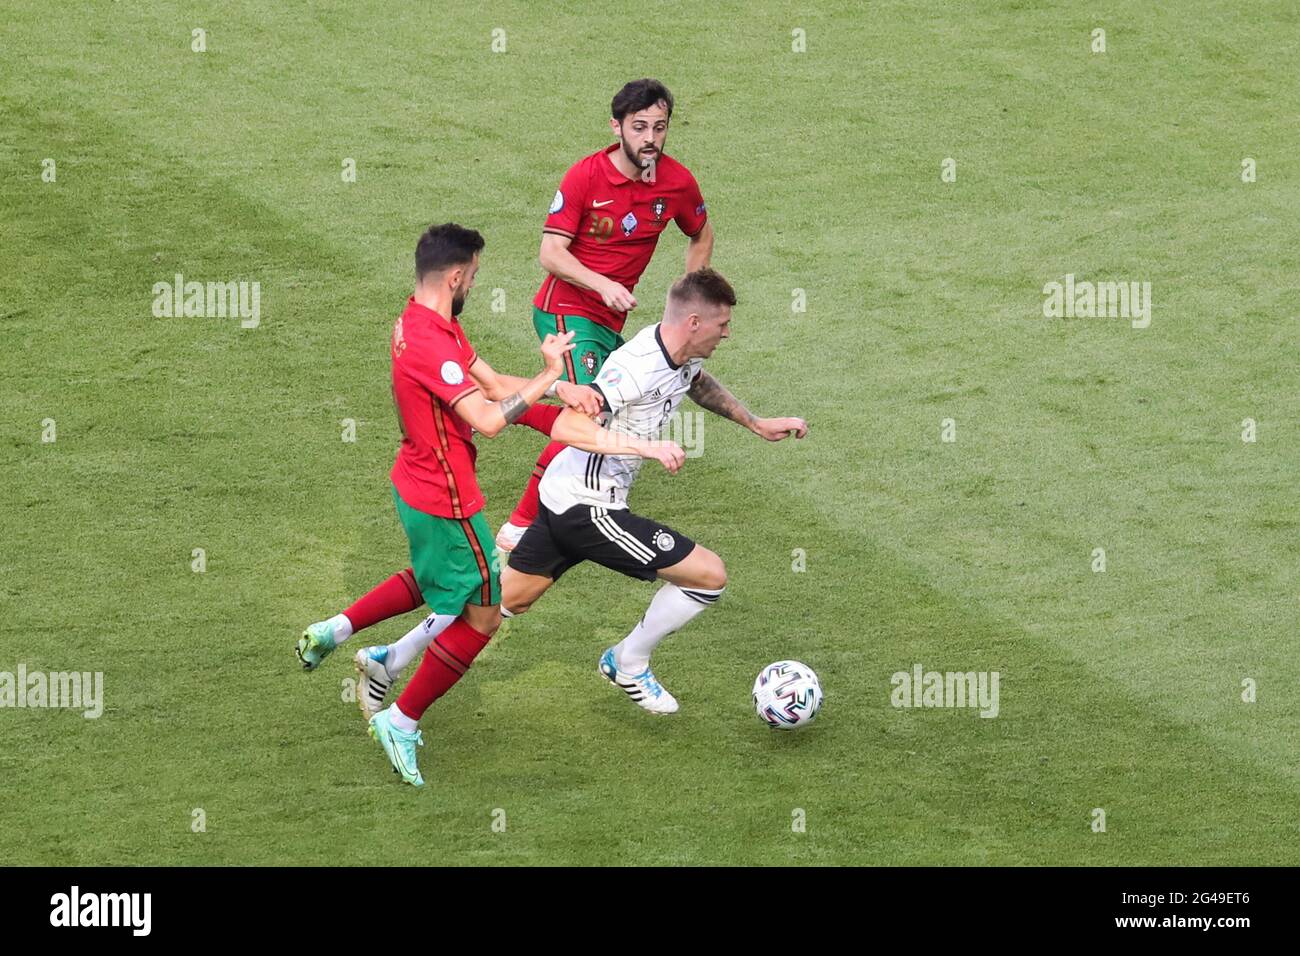 Munich, Germany. 19th June, 2021. Toni Kroos (bottom R) of Germany breaks through the defense from Bruno Fernandes (bottom L) and Bernardo Silva of Portugal during the UEFA Euro 2020 Championship Group F match in Munich, Germany, June 19, 2021. Credit: Shan Yuqi/Xinhua/Alamy Live News Stock Photo